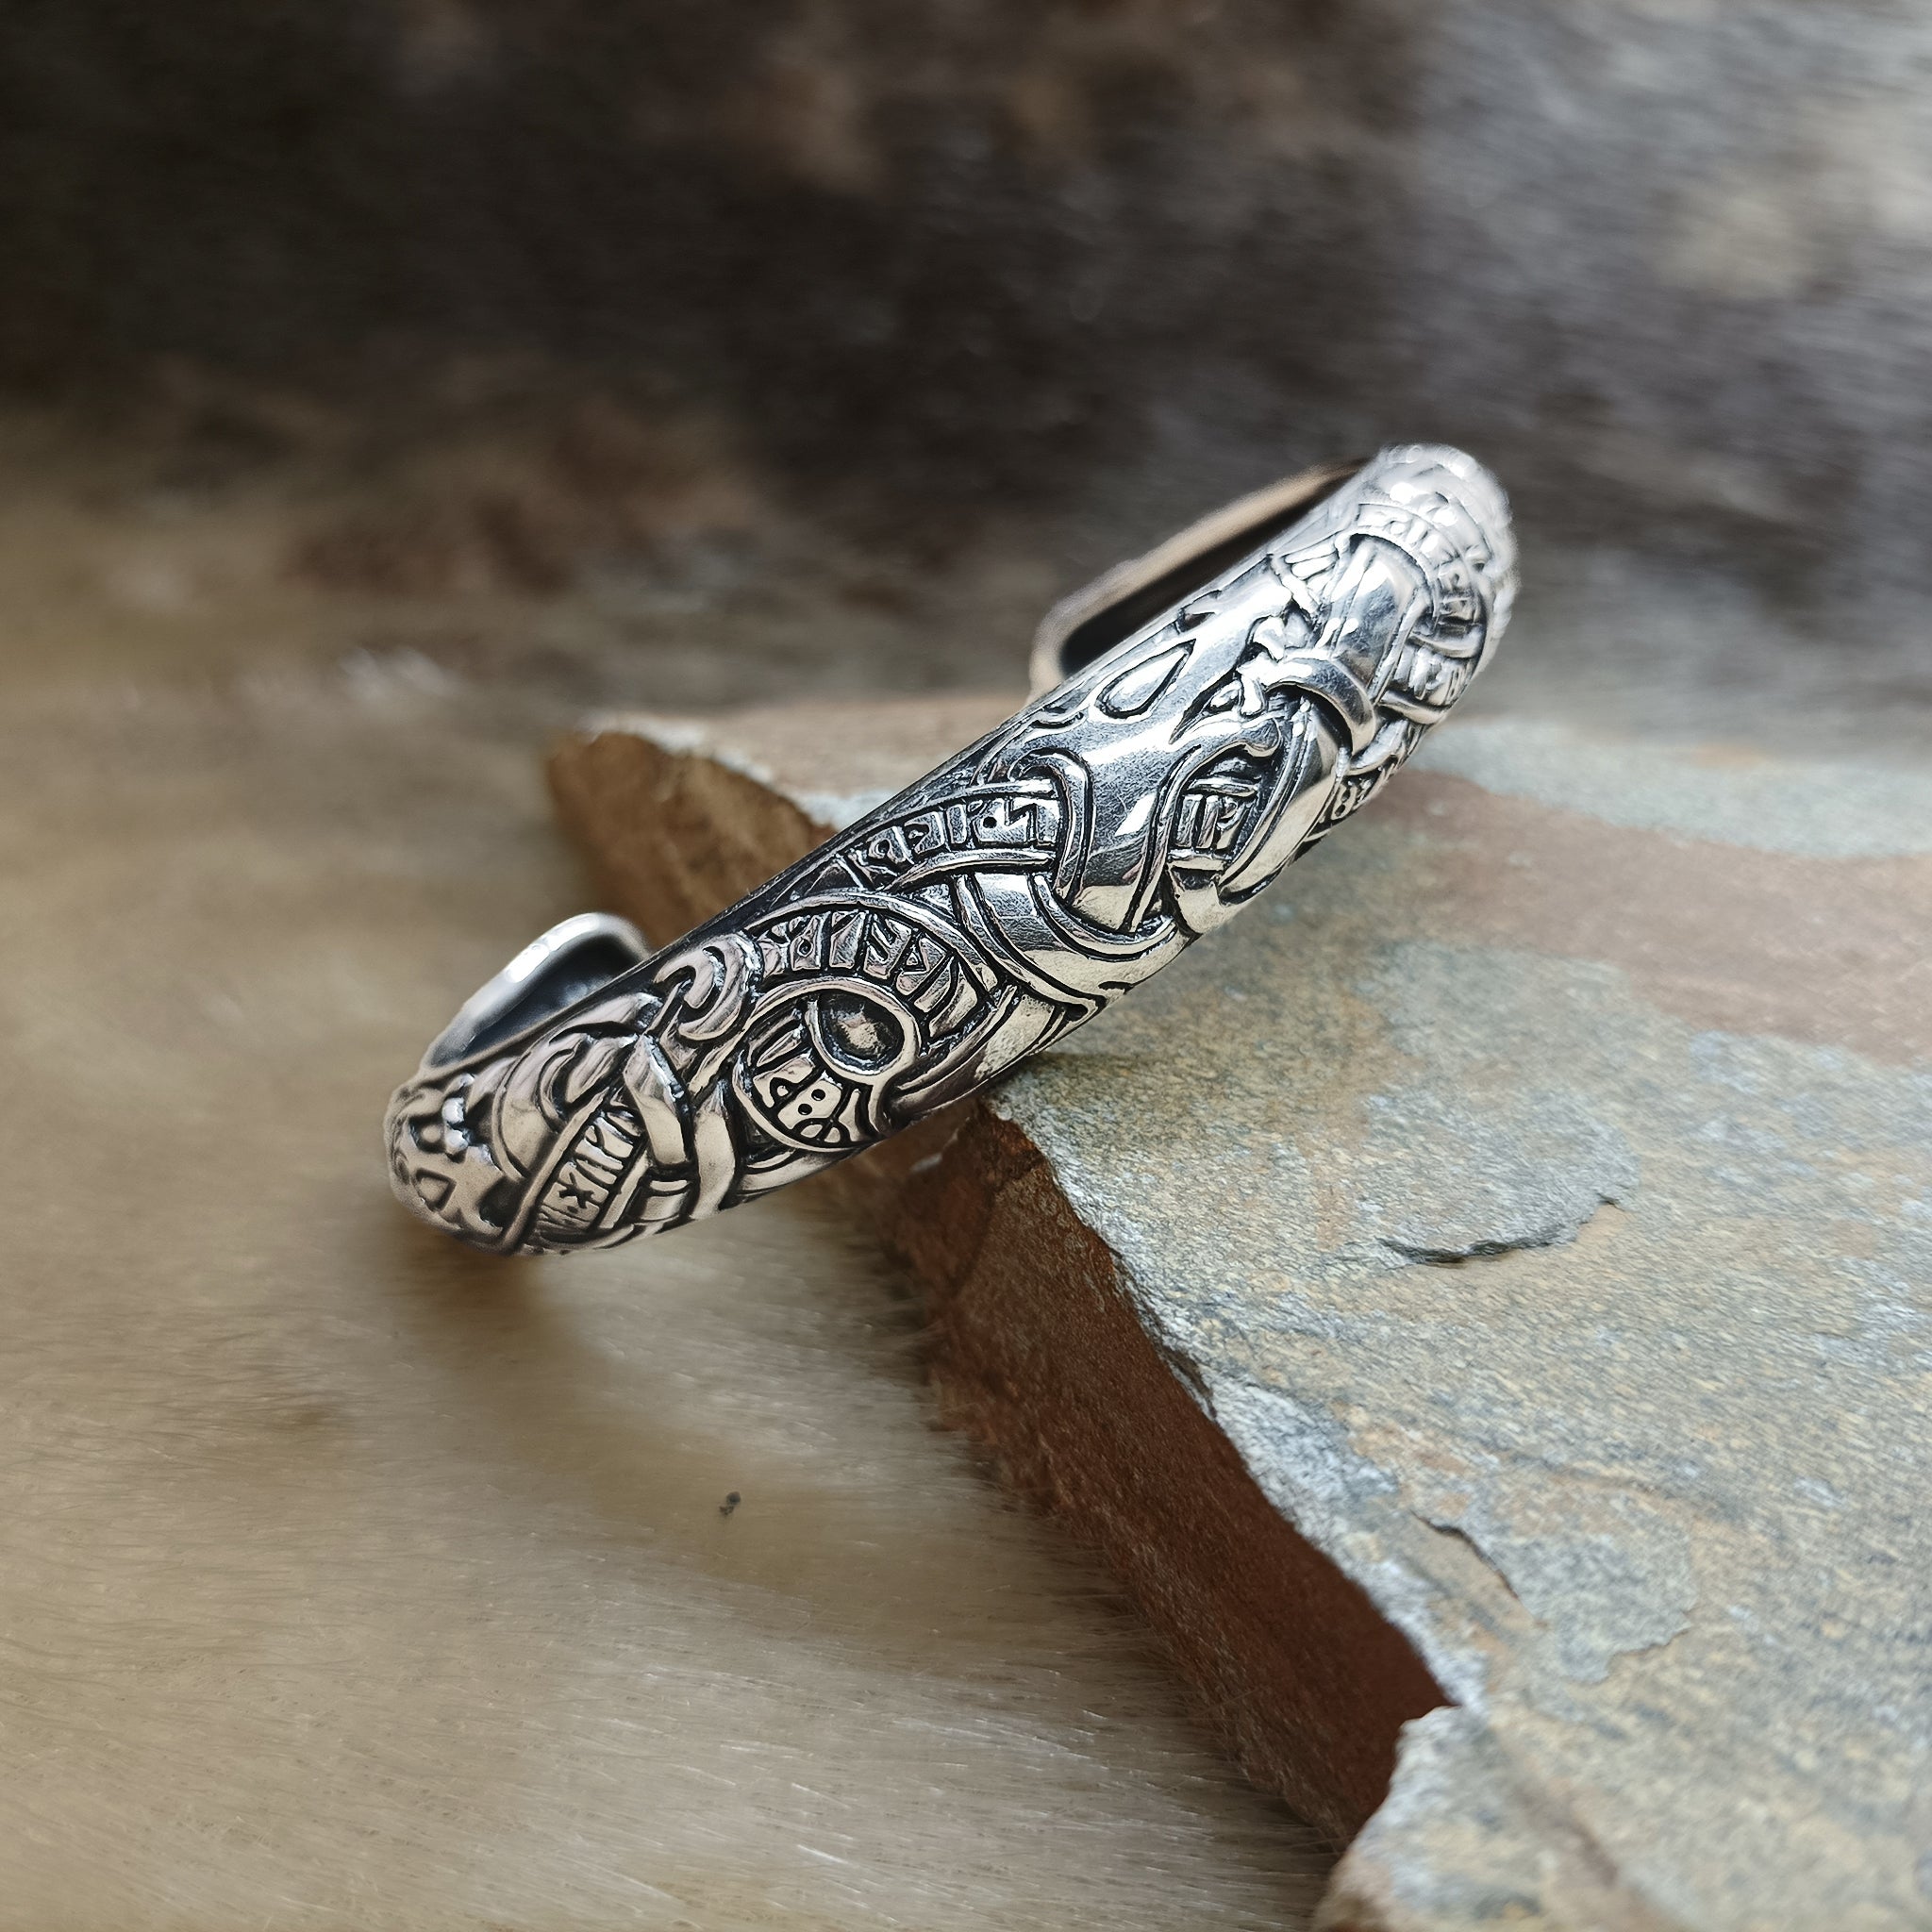 Buy Ghungaroo Bracelet and Extended Ring, Indian Oxidized German Silver  Jewelry, Gifts for Her, Boho Hippie Jewellery, Designer Silver Look Alik  Online in India - Etsy